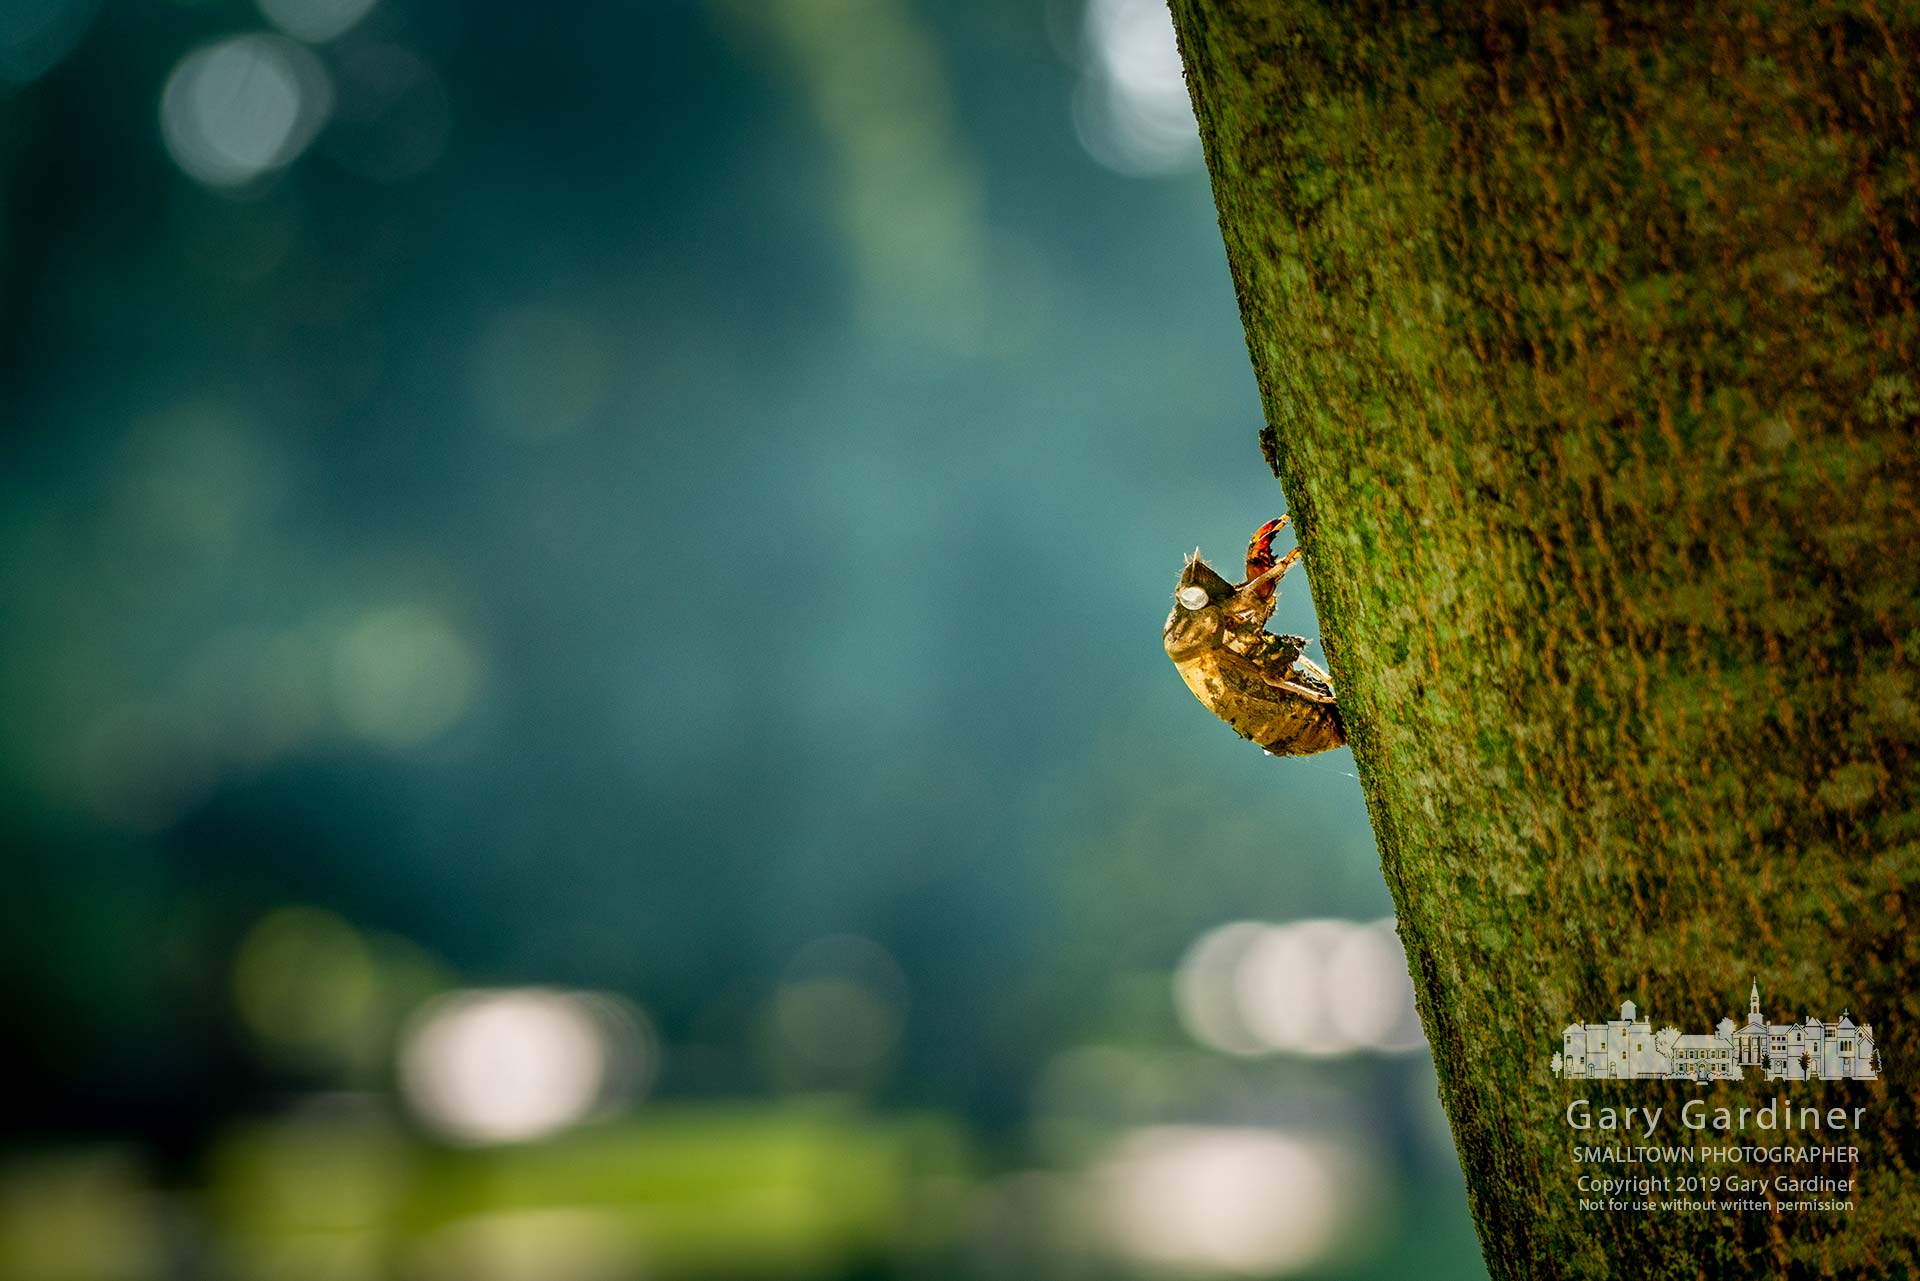 The desiccated skin of a mature cicada clings to the trunk of a tree along the roadway leading into Alum Creek Park North. My Final Photo for July 31, 2019.